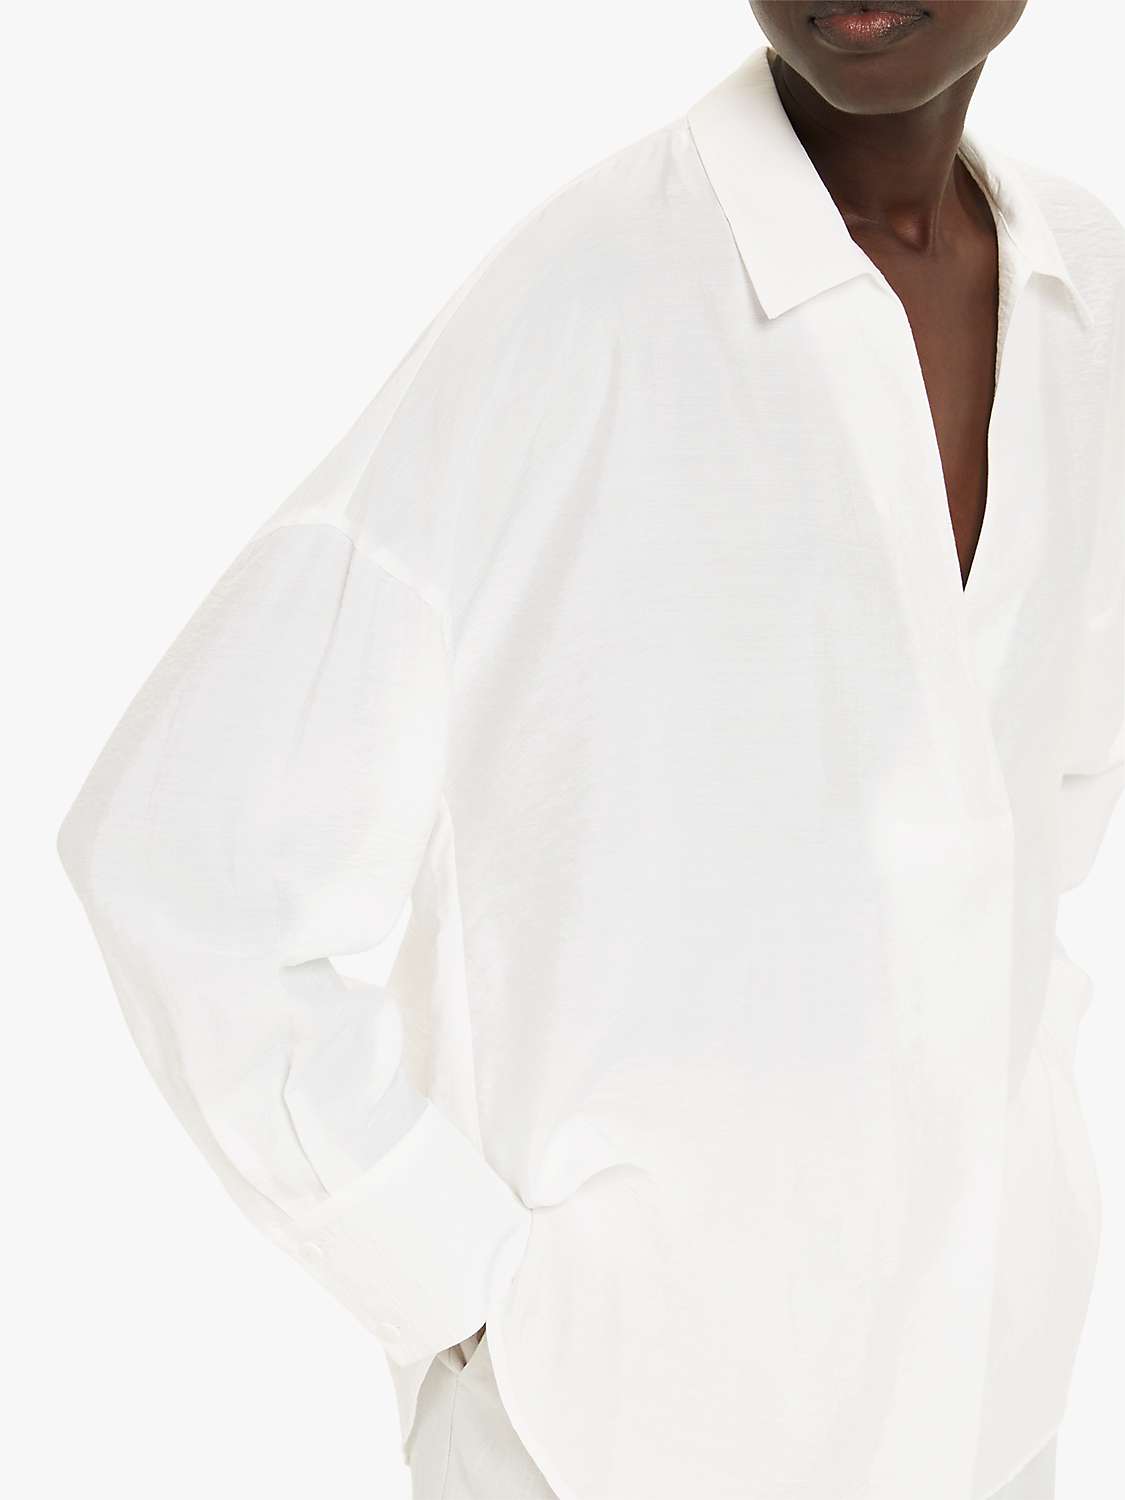 Buy Whistles Riley Plain Tunic Top, White Online at johnlewis.com